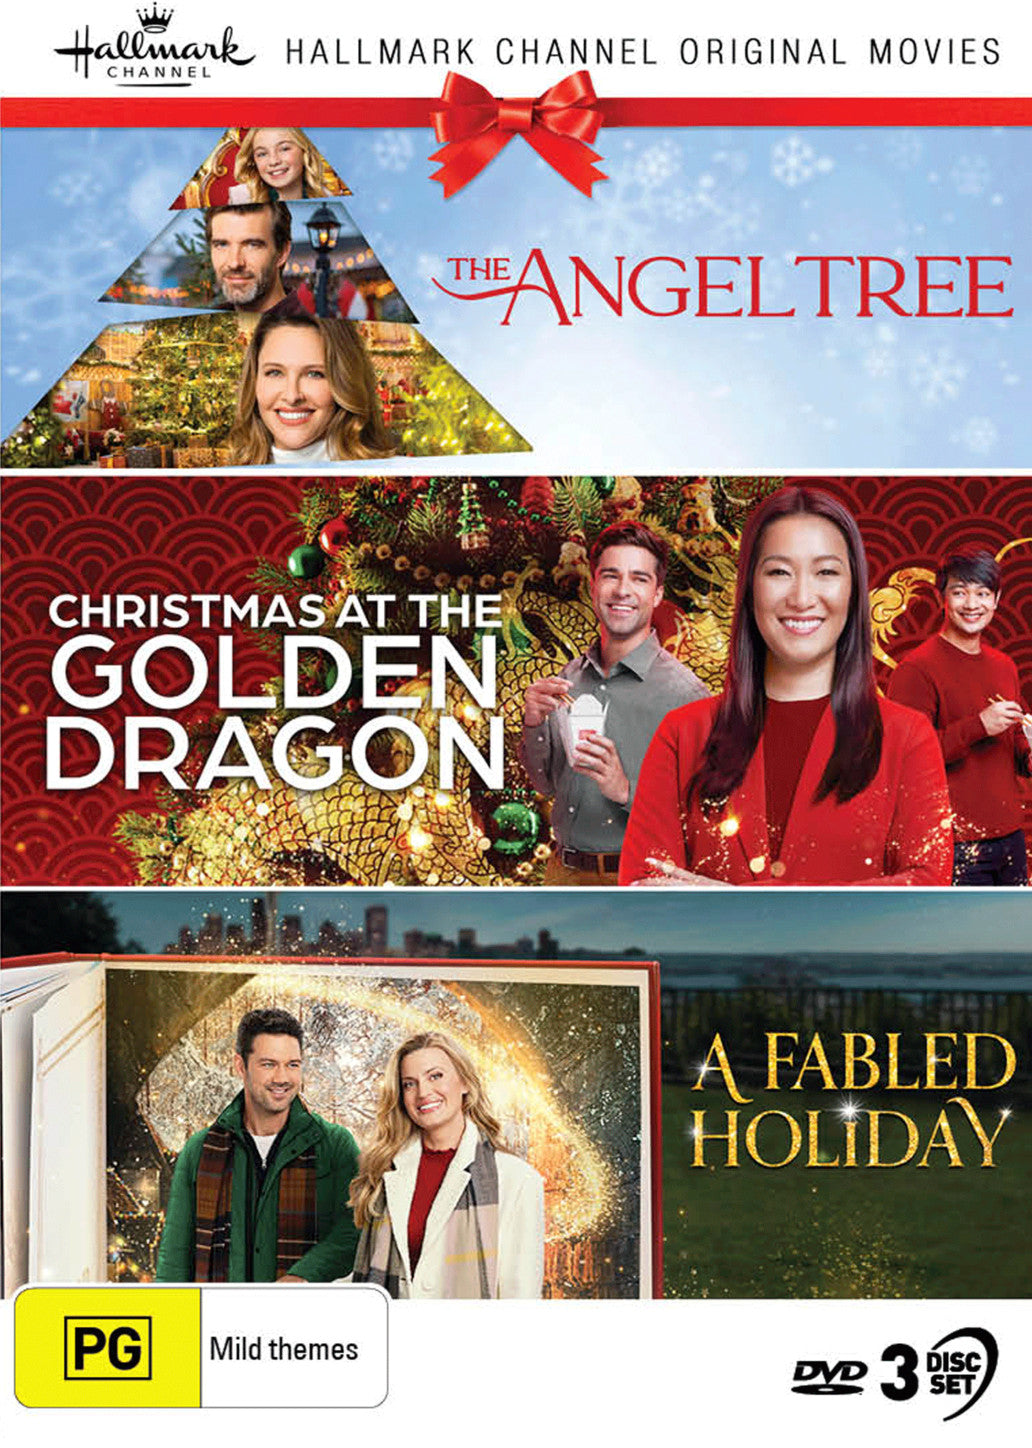 HALLMARK CHRISTMAS COLLECTION 33 (THE ANGEL TREE / CHRISTMAS AT THE GOLDEN DRAGON / A FABLED HOLIDAY)